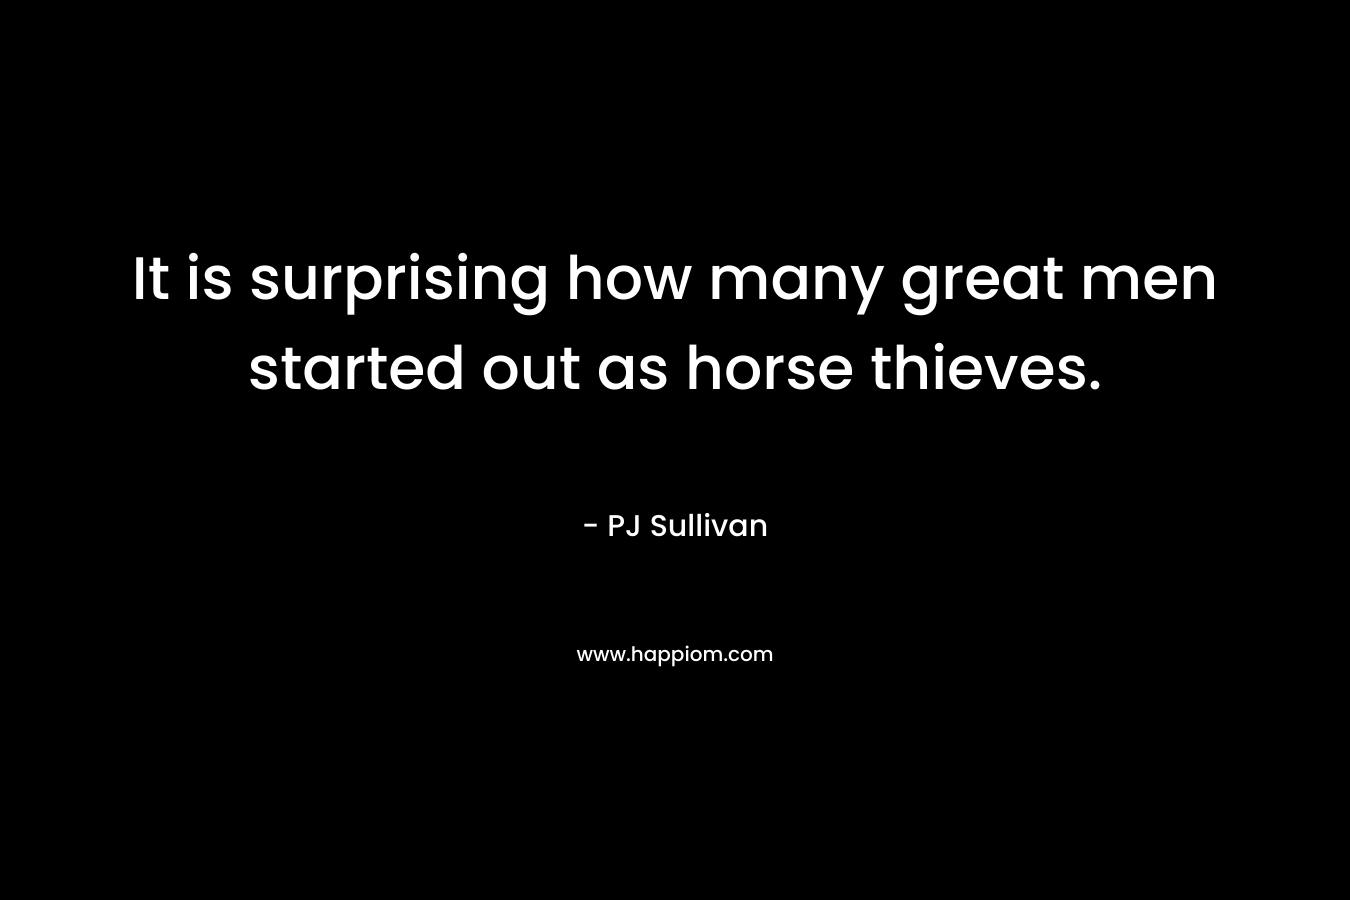 It is surprising how many great men started out as horse thieves.